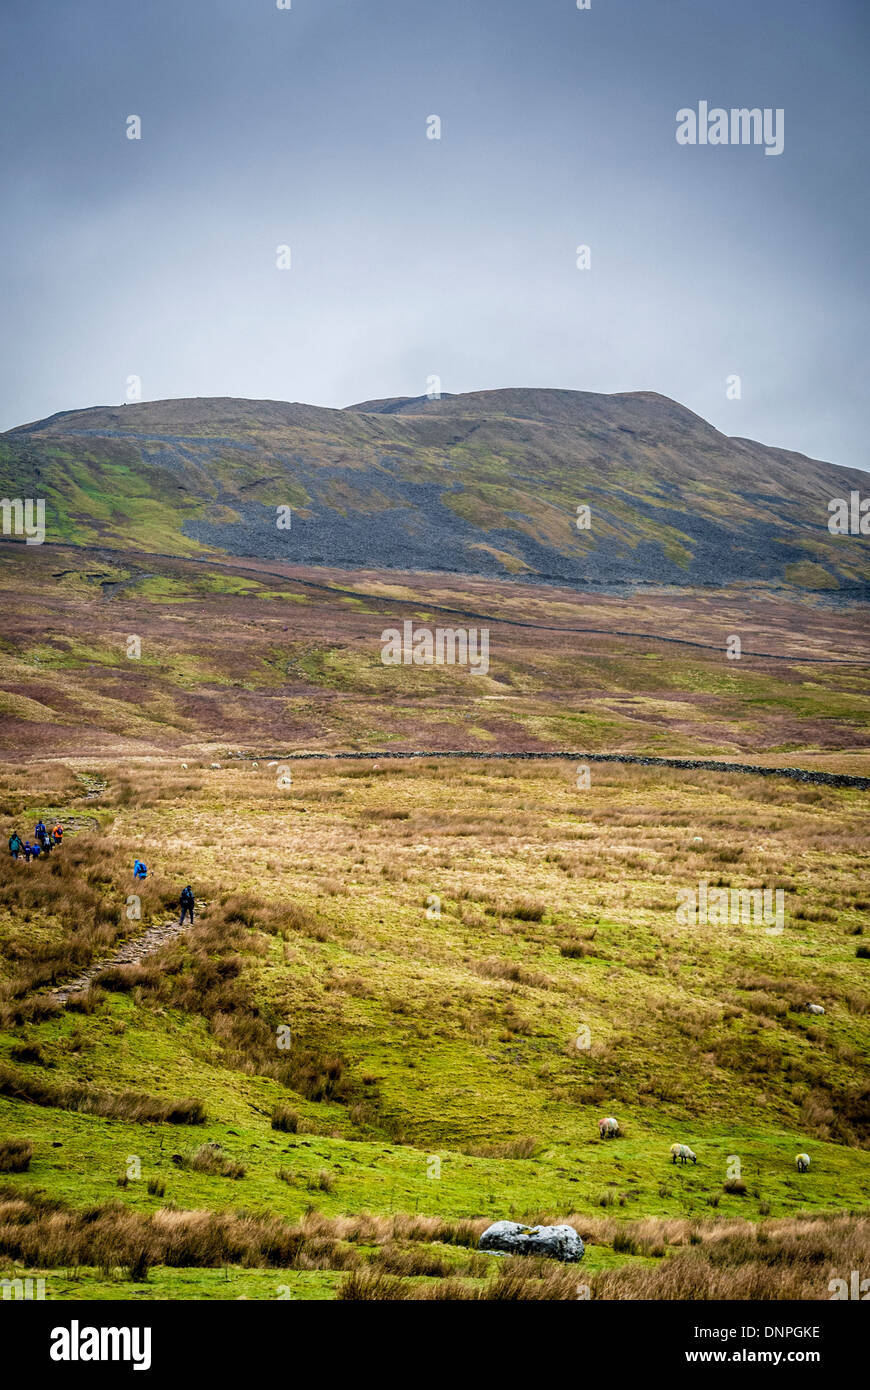 Whernside, North Yorkshire, one of Yorkshire Three Peaks with walkers visible ascending. Stock Photo